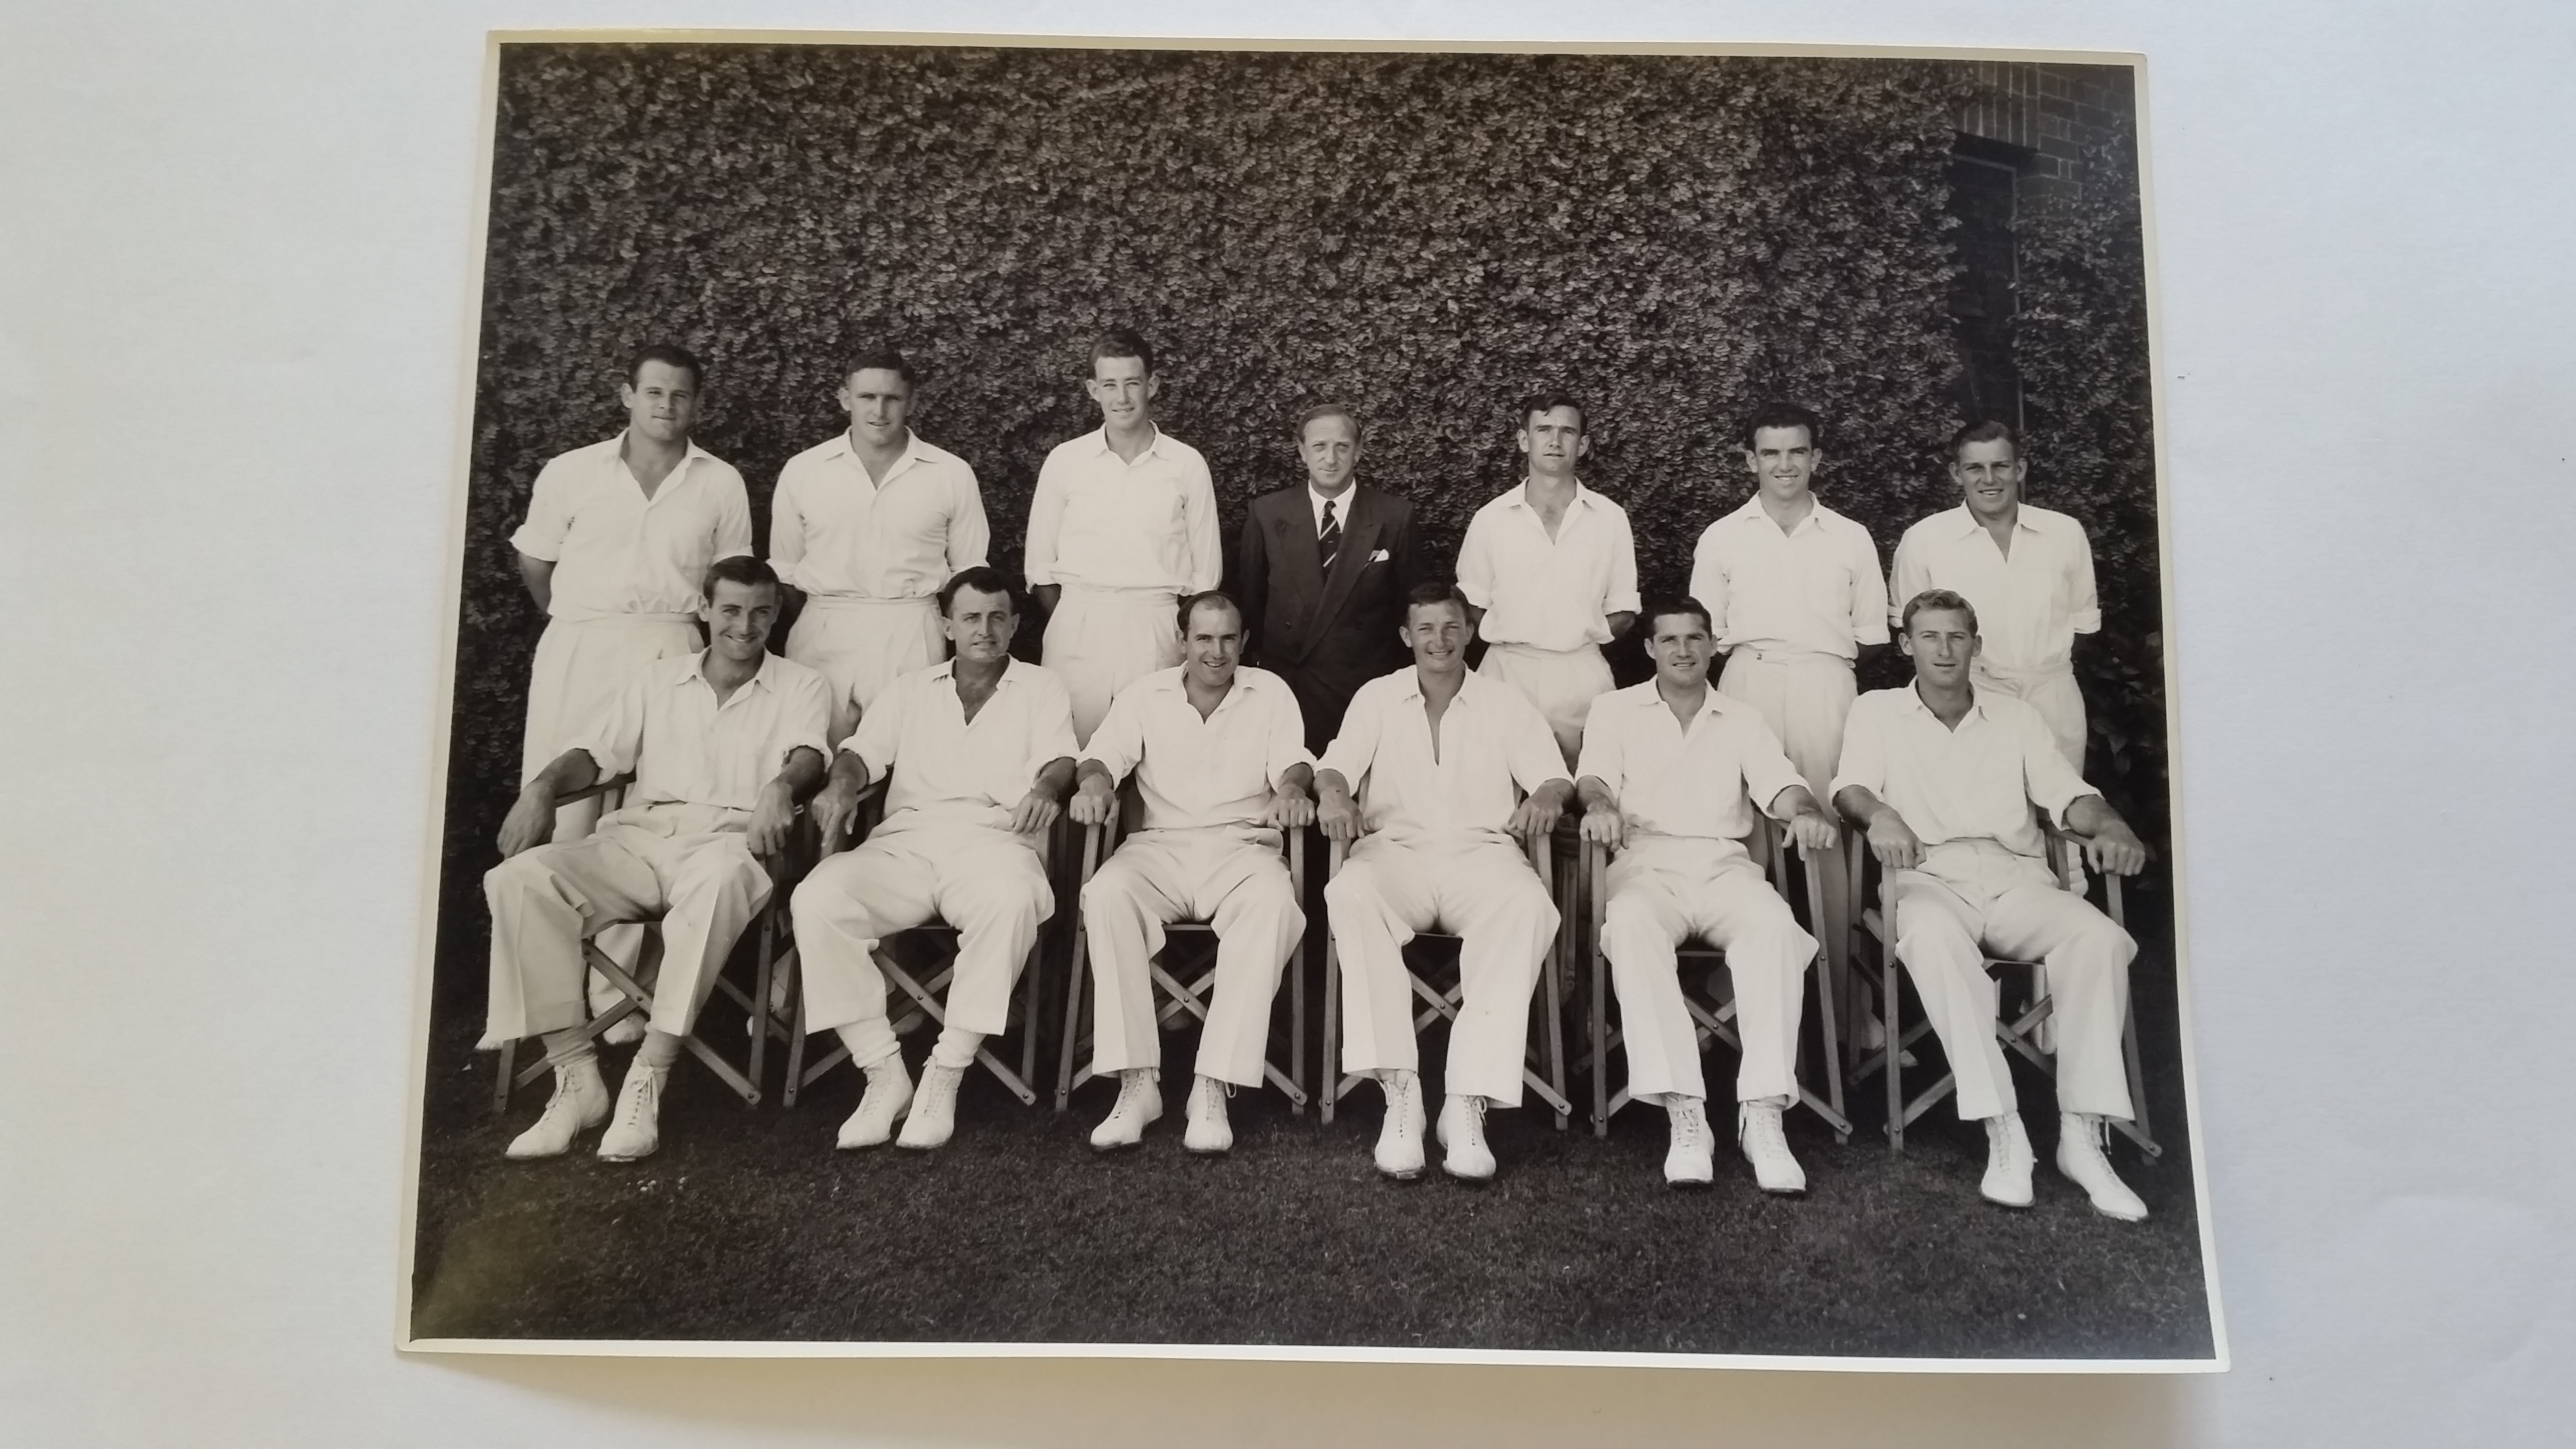 CRICKET, press photo of 1958/9 Australian team, for test v England (at Melbourne), agency stamp to